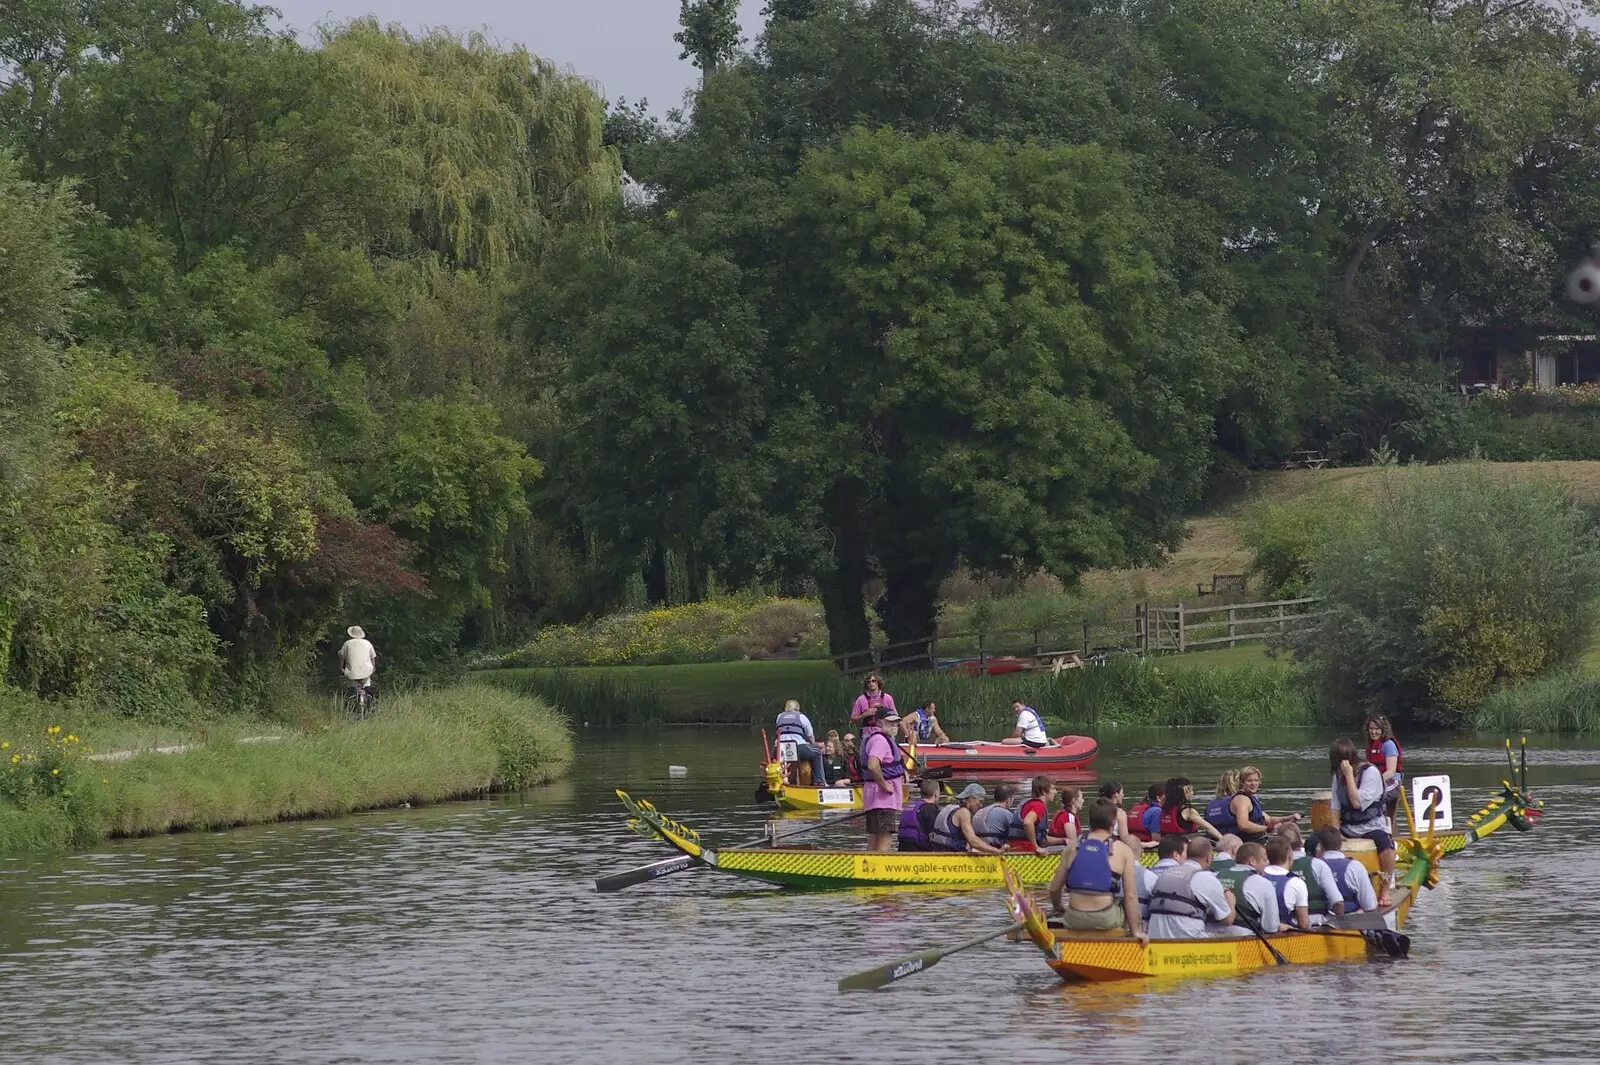 A bucolic scene after the finish line, from Qualcomm's Dragon-Boat Racing, Fen Ditton, Cambridge - 8th September 2007